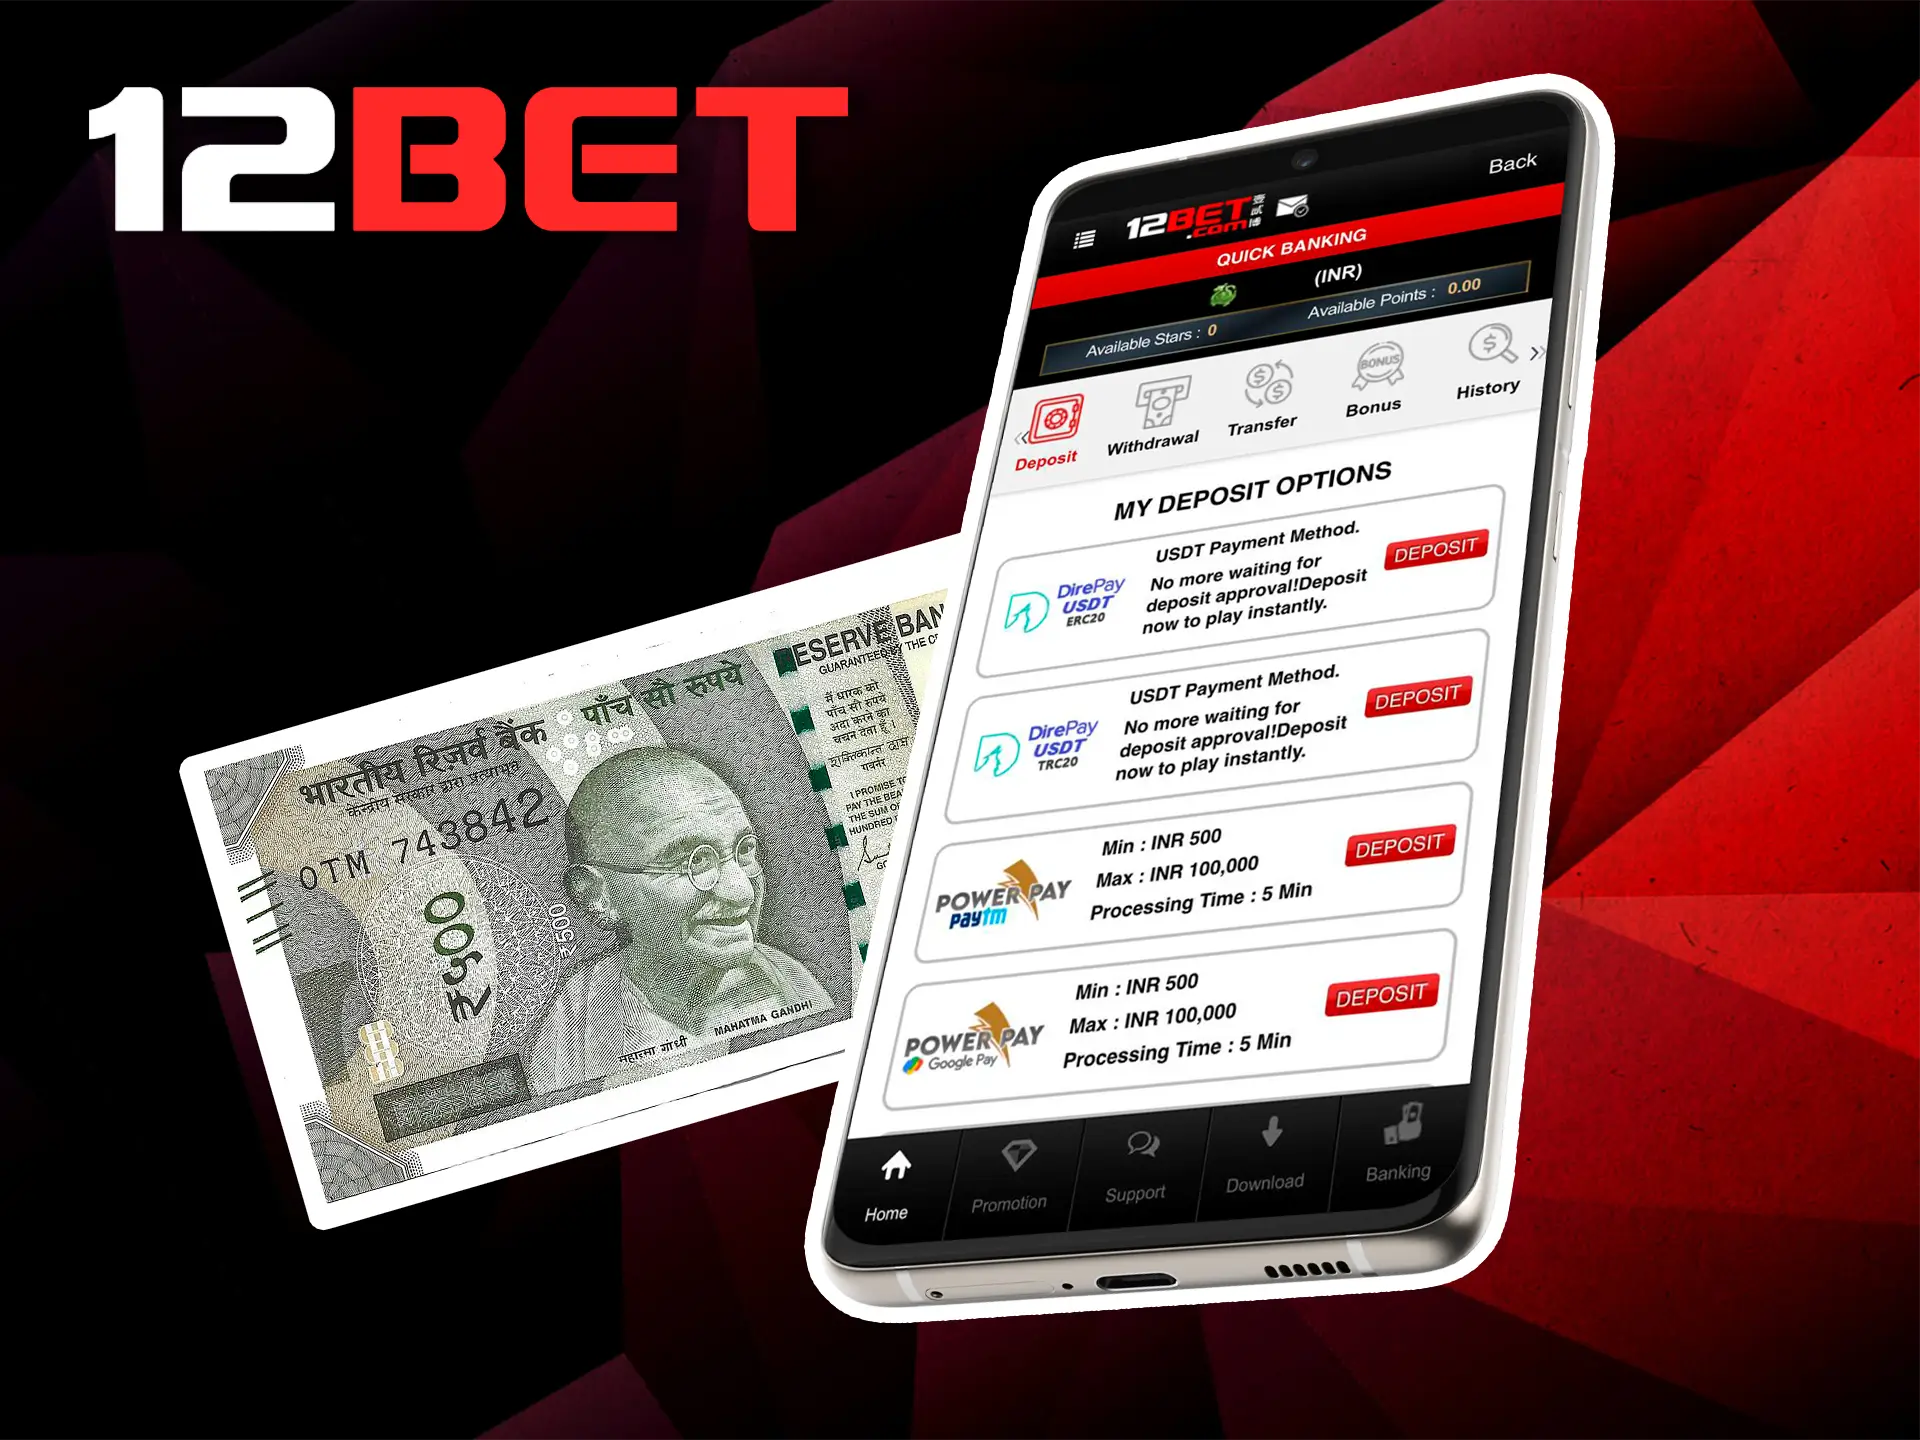 All withdrawal and deposit methods are available on the popular app from 12Bet Casino.